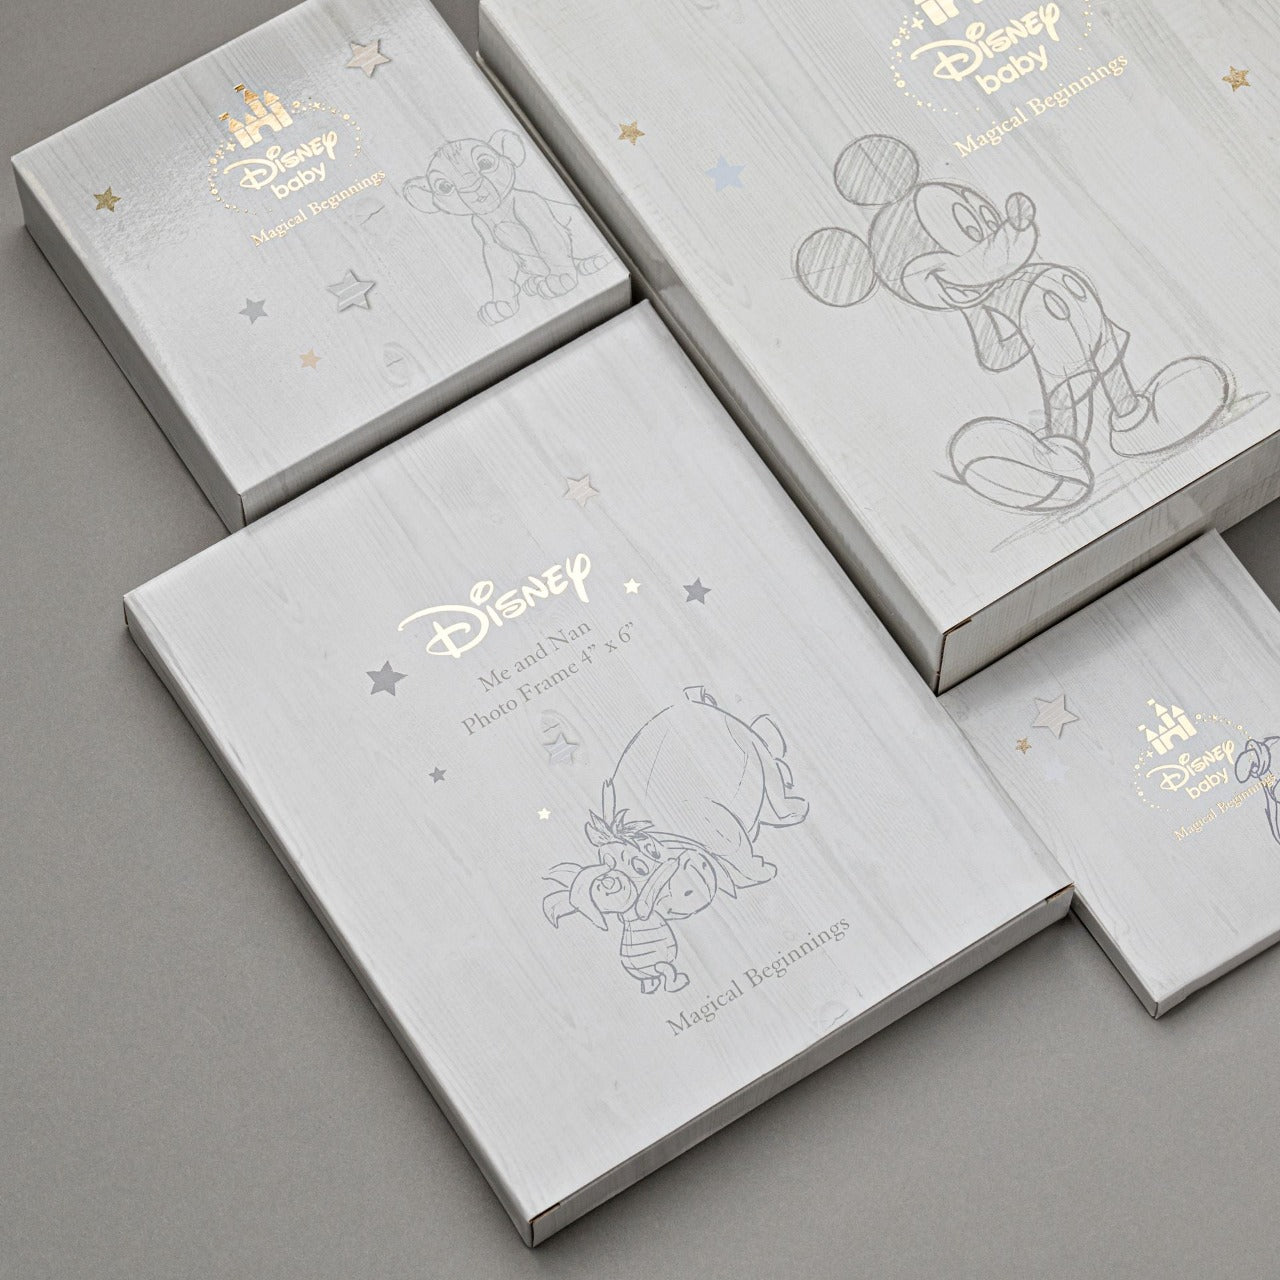 Disney Magical Beginnings Photo Album 4" x 6" Minnie Mouse  Add a touch of magic to your every day with this Magical Beginnings Photo Album.  As part of our range of classic Disney illustration giftware, this photo album displays a beautiful depiction of the classic Disney character, Minnie Mouse, 'Gorgeous Baby Girl' gold glitter lettering and space for fifty 4" x 6" photos.